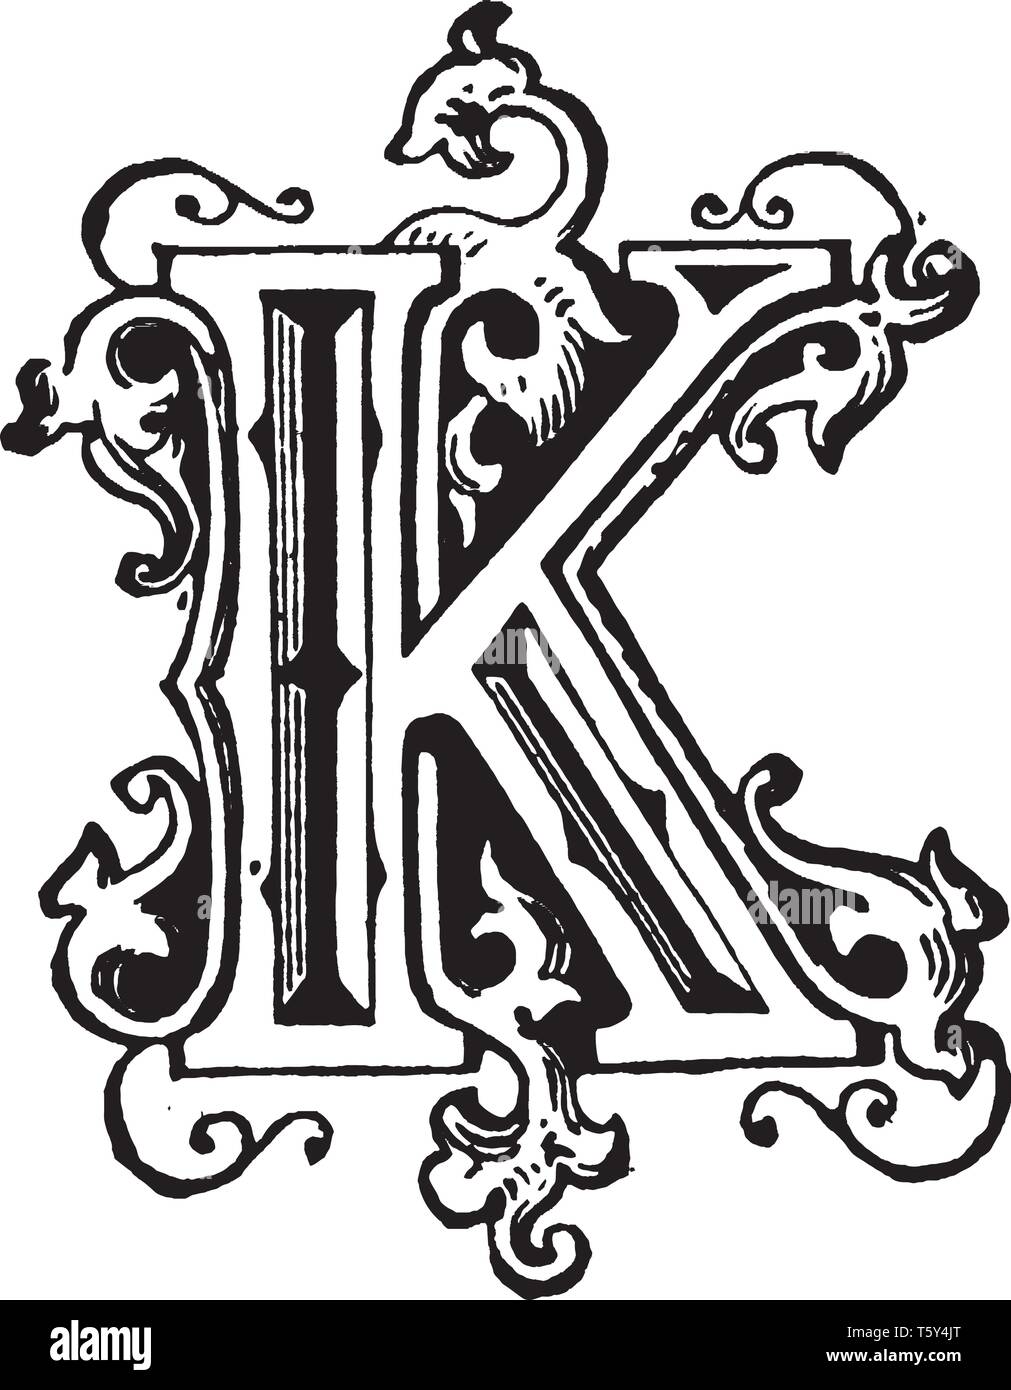 Letter k drawing Stock Vector Images - Alamy